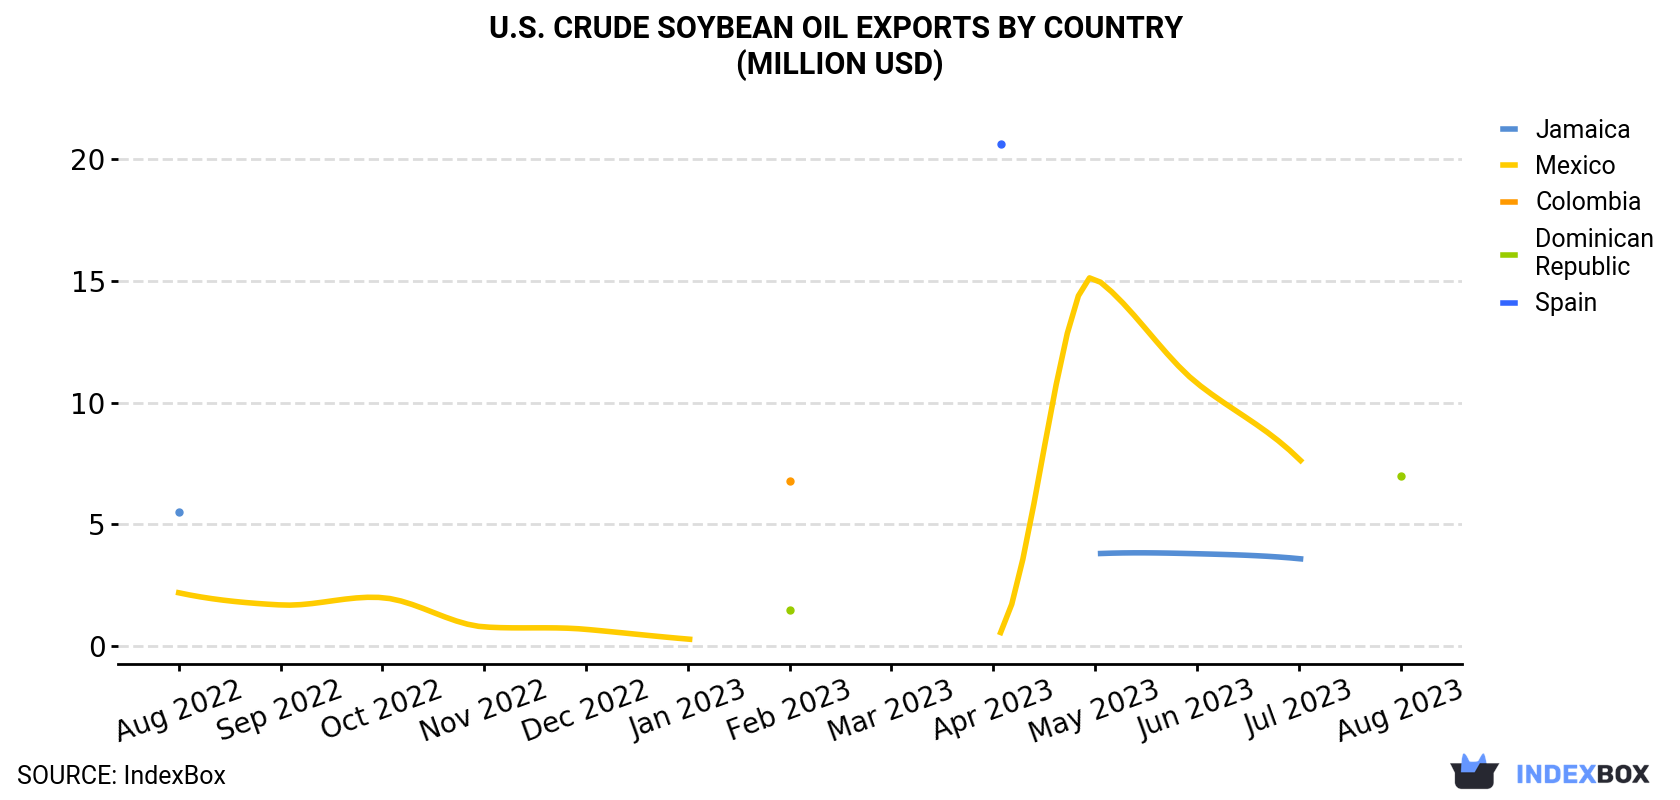 U.S. Crude Soybean Oil Exports By Country (Million USD)